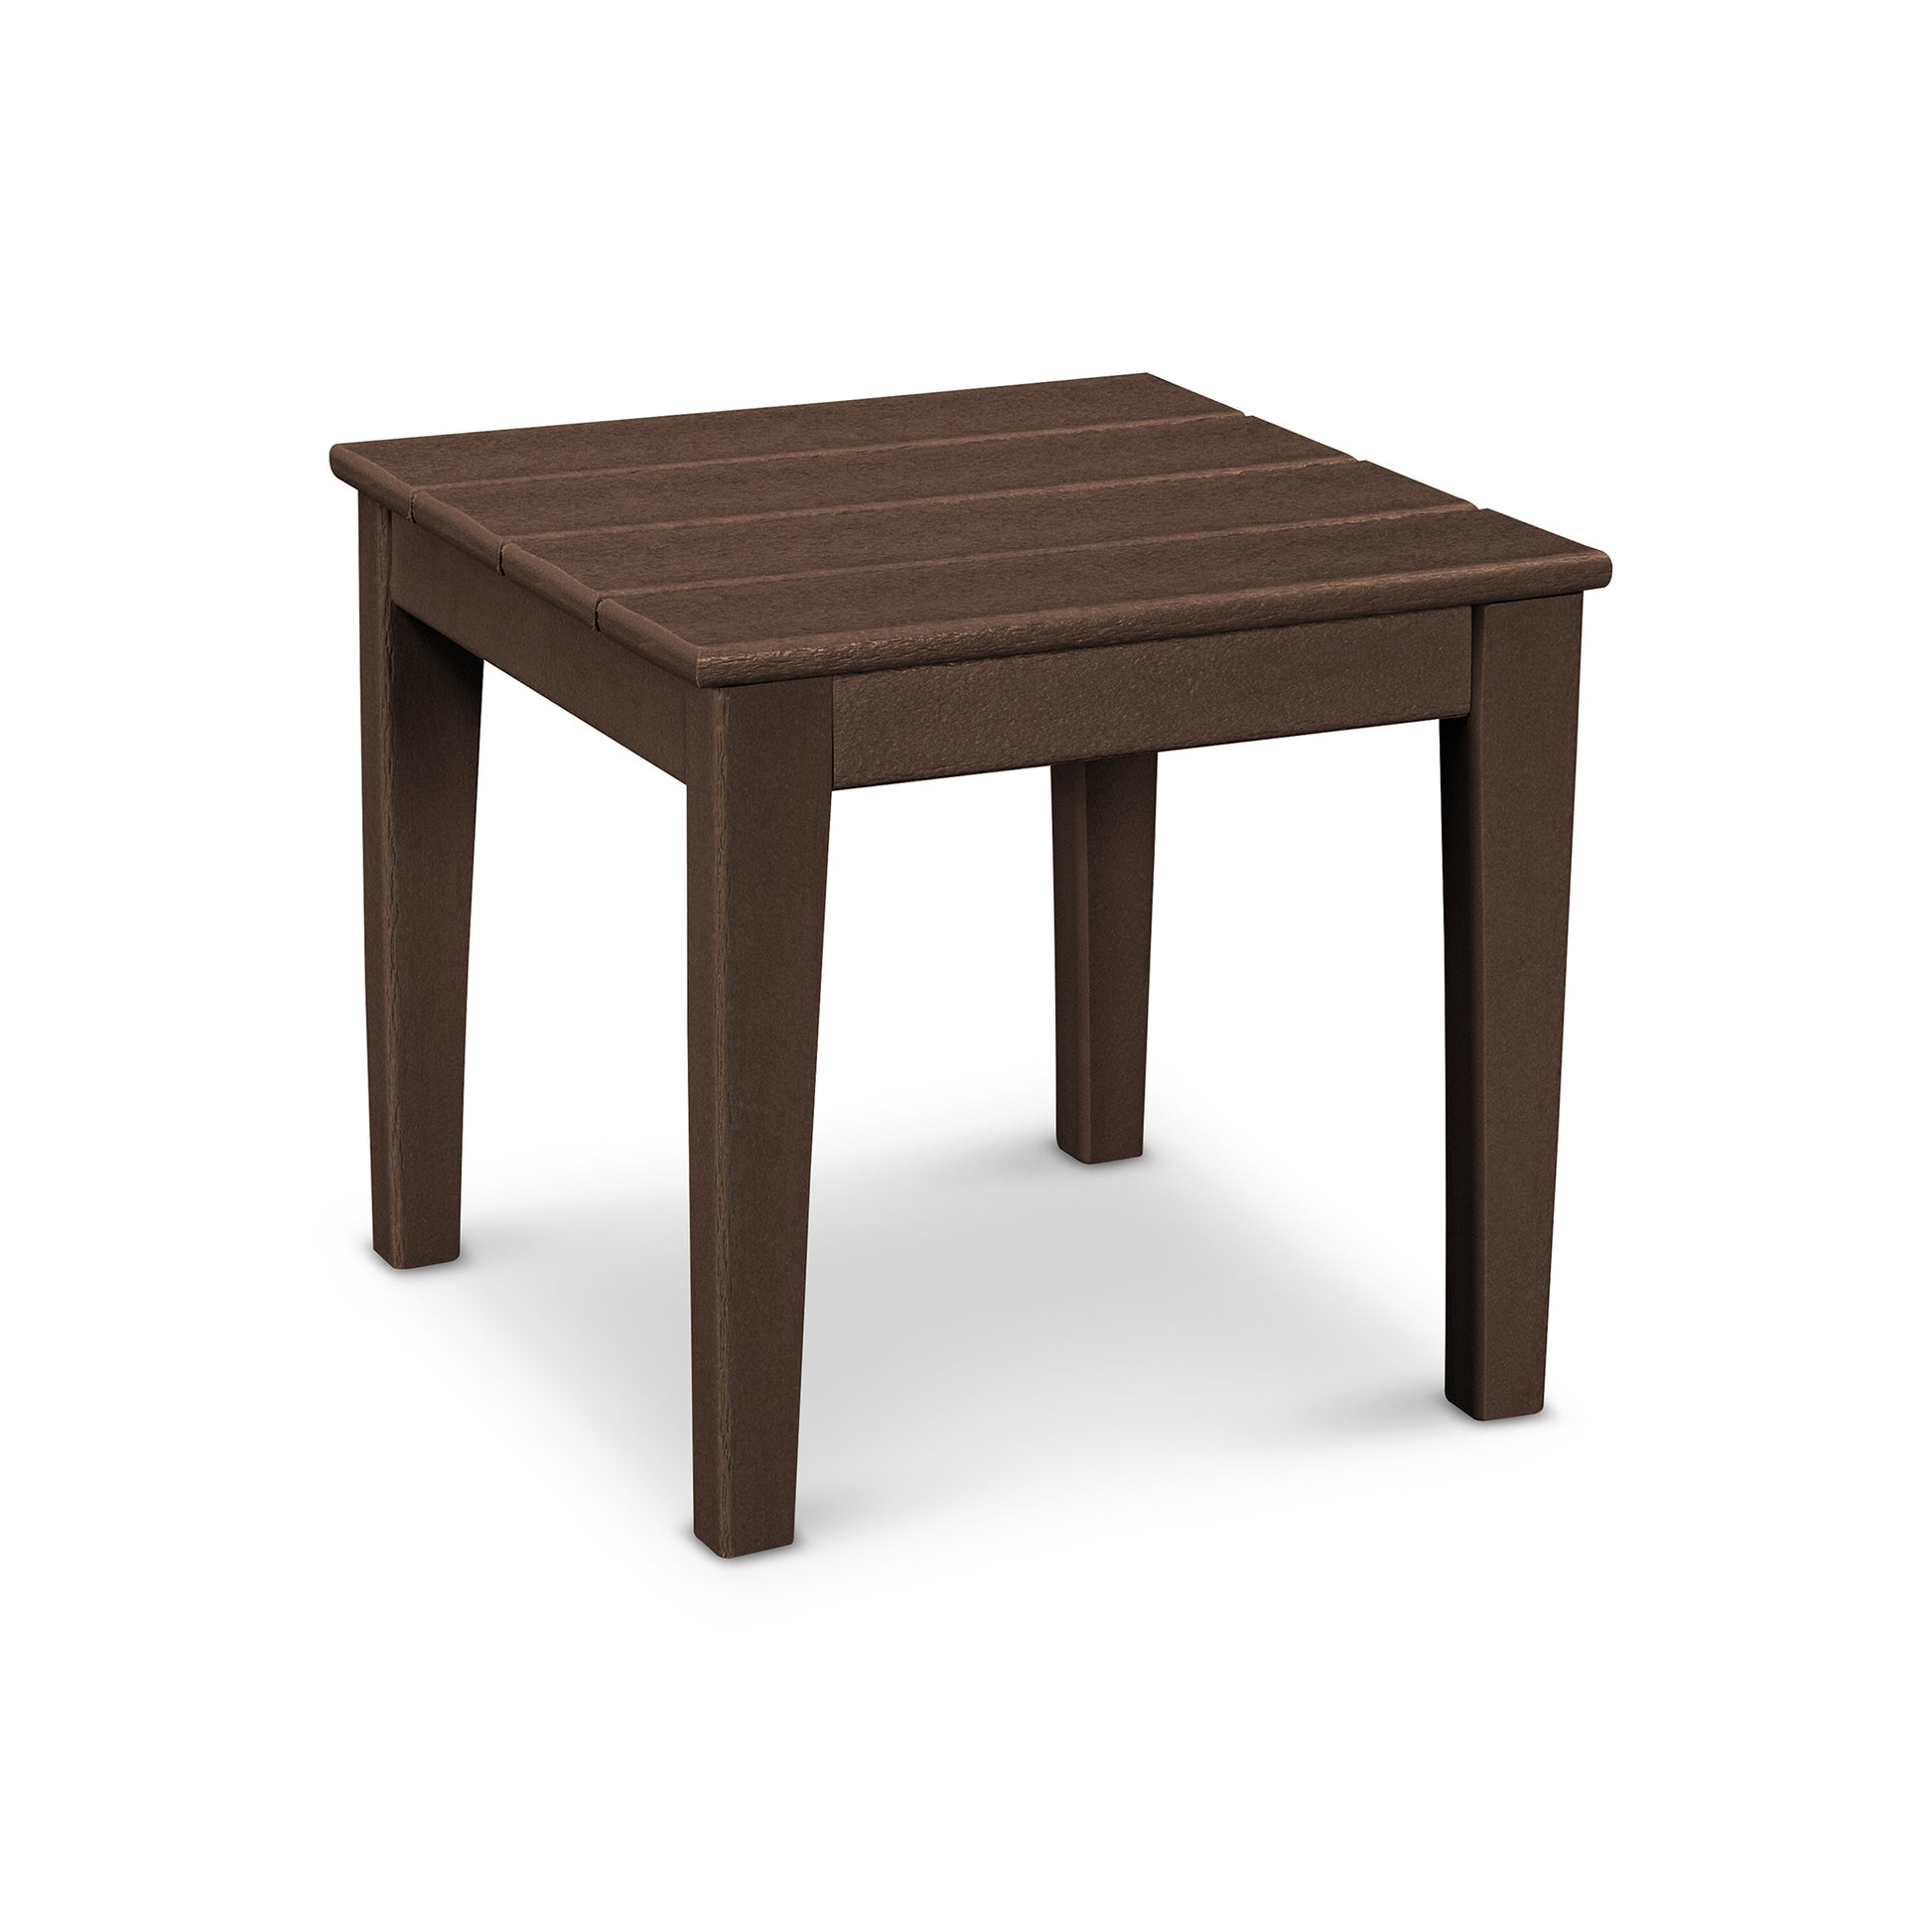 A simple brown POLYWOOD® Newport 18" End Table with a textured top and four sturdy legs, weather resistant, isolated on a white background.